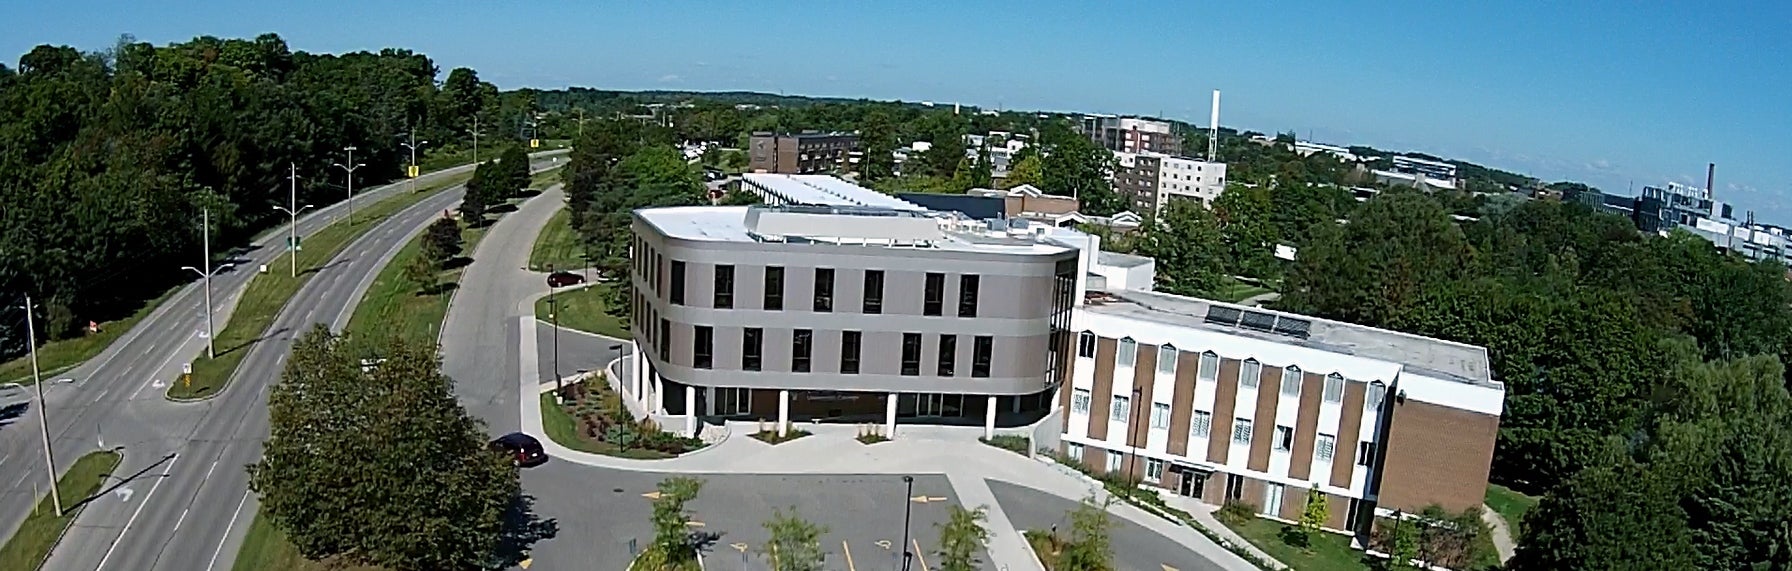 Aerial view of the Conrad Grebel University College Building